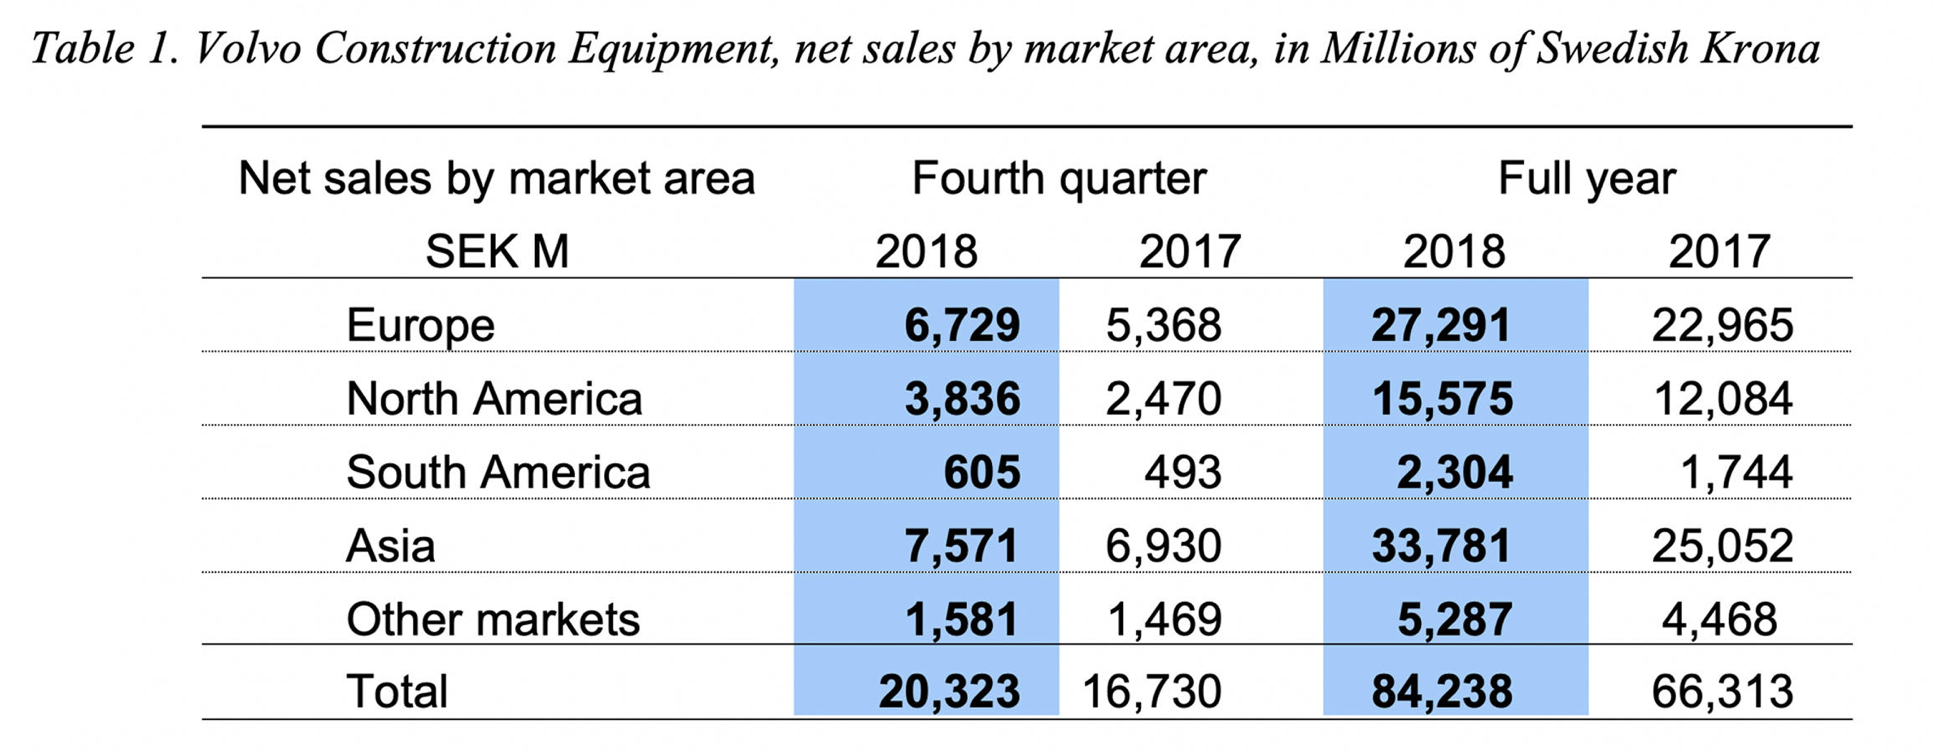 Volvo Construction Equipment Net Sales by Market Area